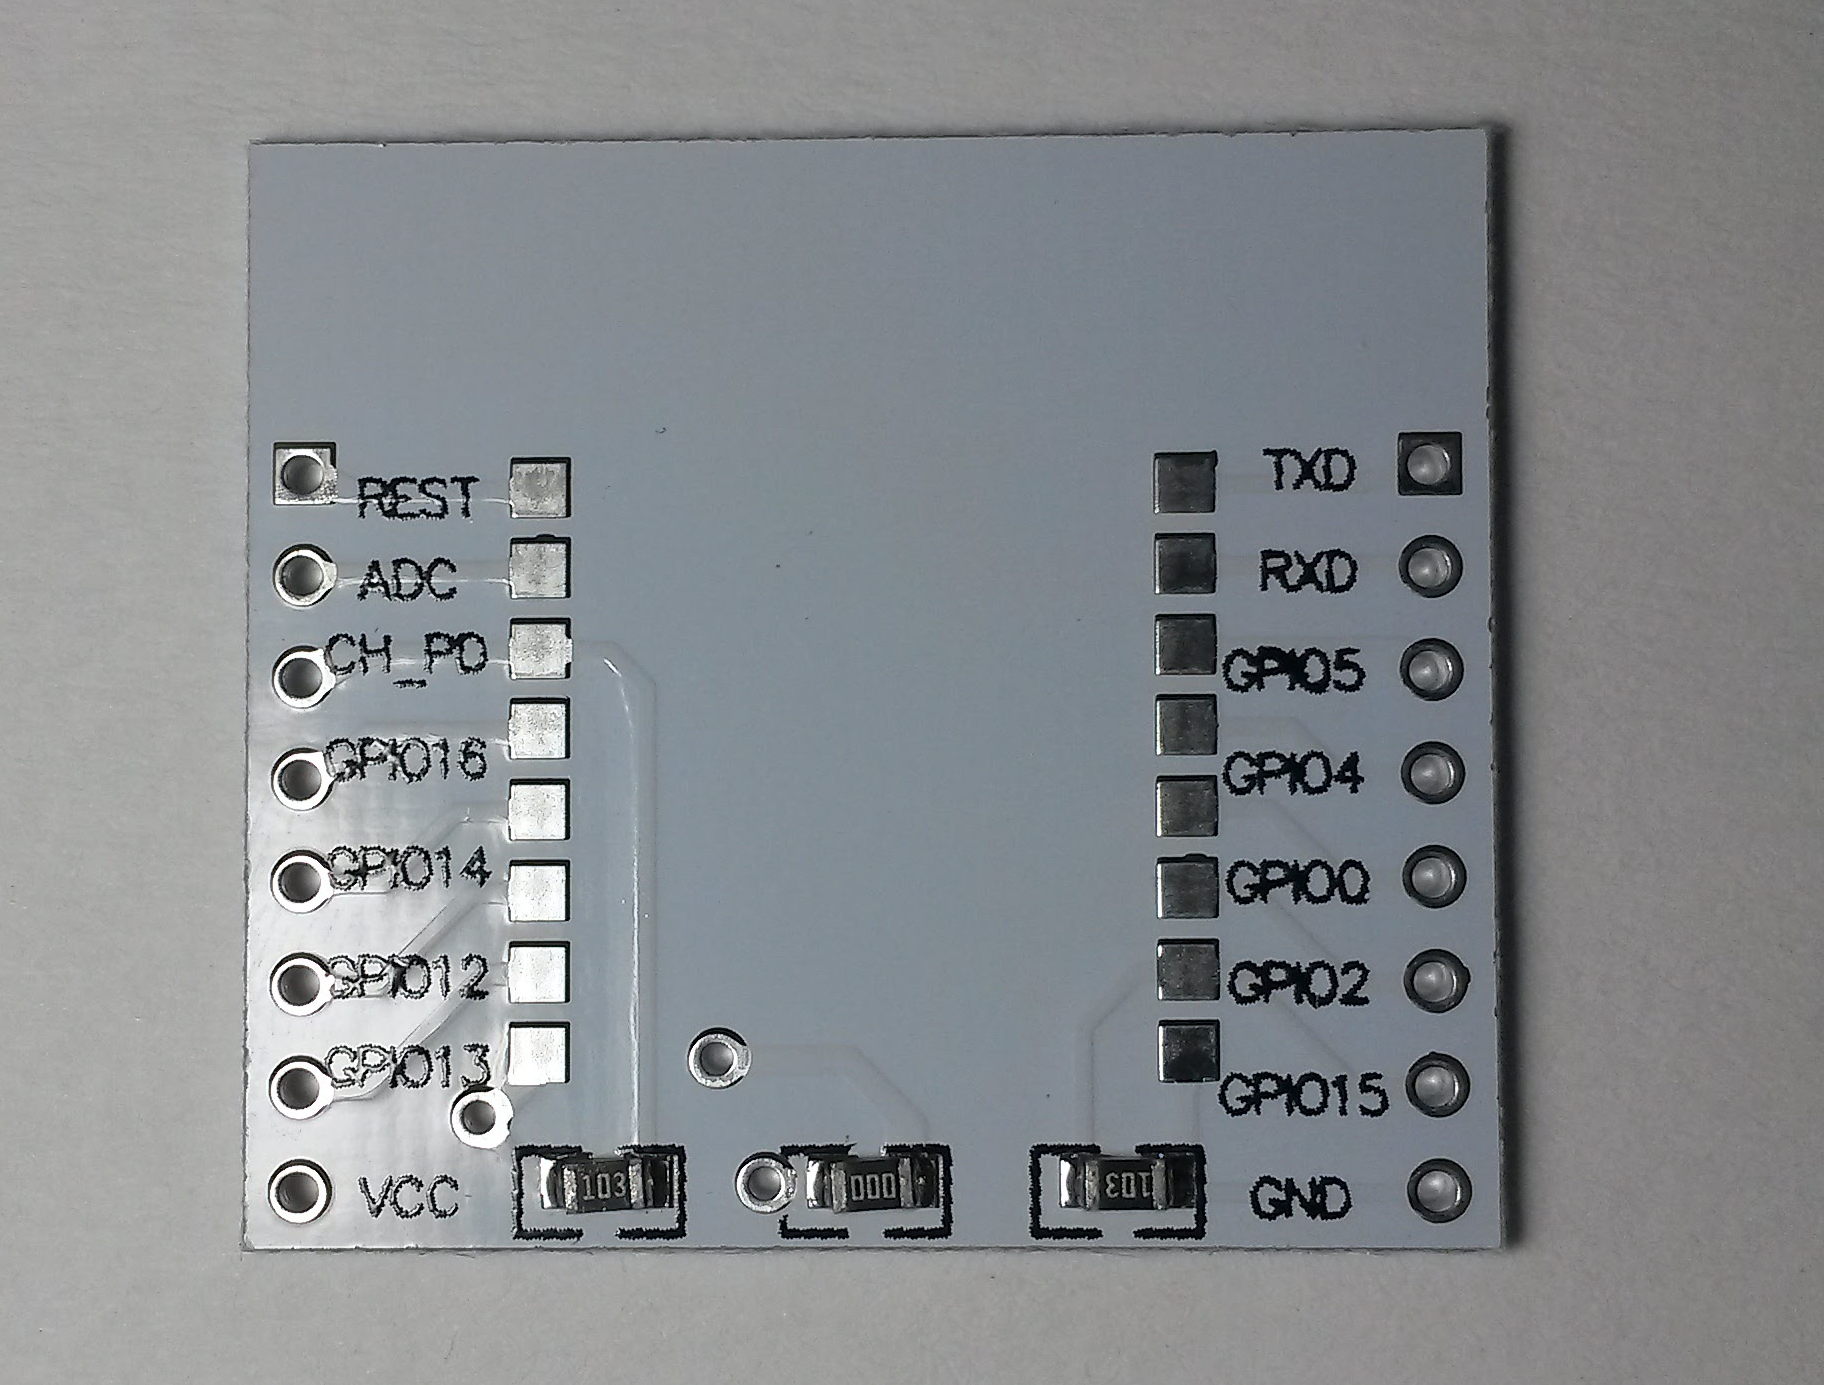 Minimal ESP-12 breakout - top side. You can see a 10k pull-up on CH_PD (enable) pin, 10k pull-down on GPIO15 and a 0R connection bridging the voltage regulator on the other side of the board.